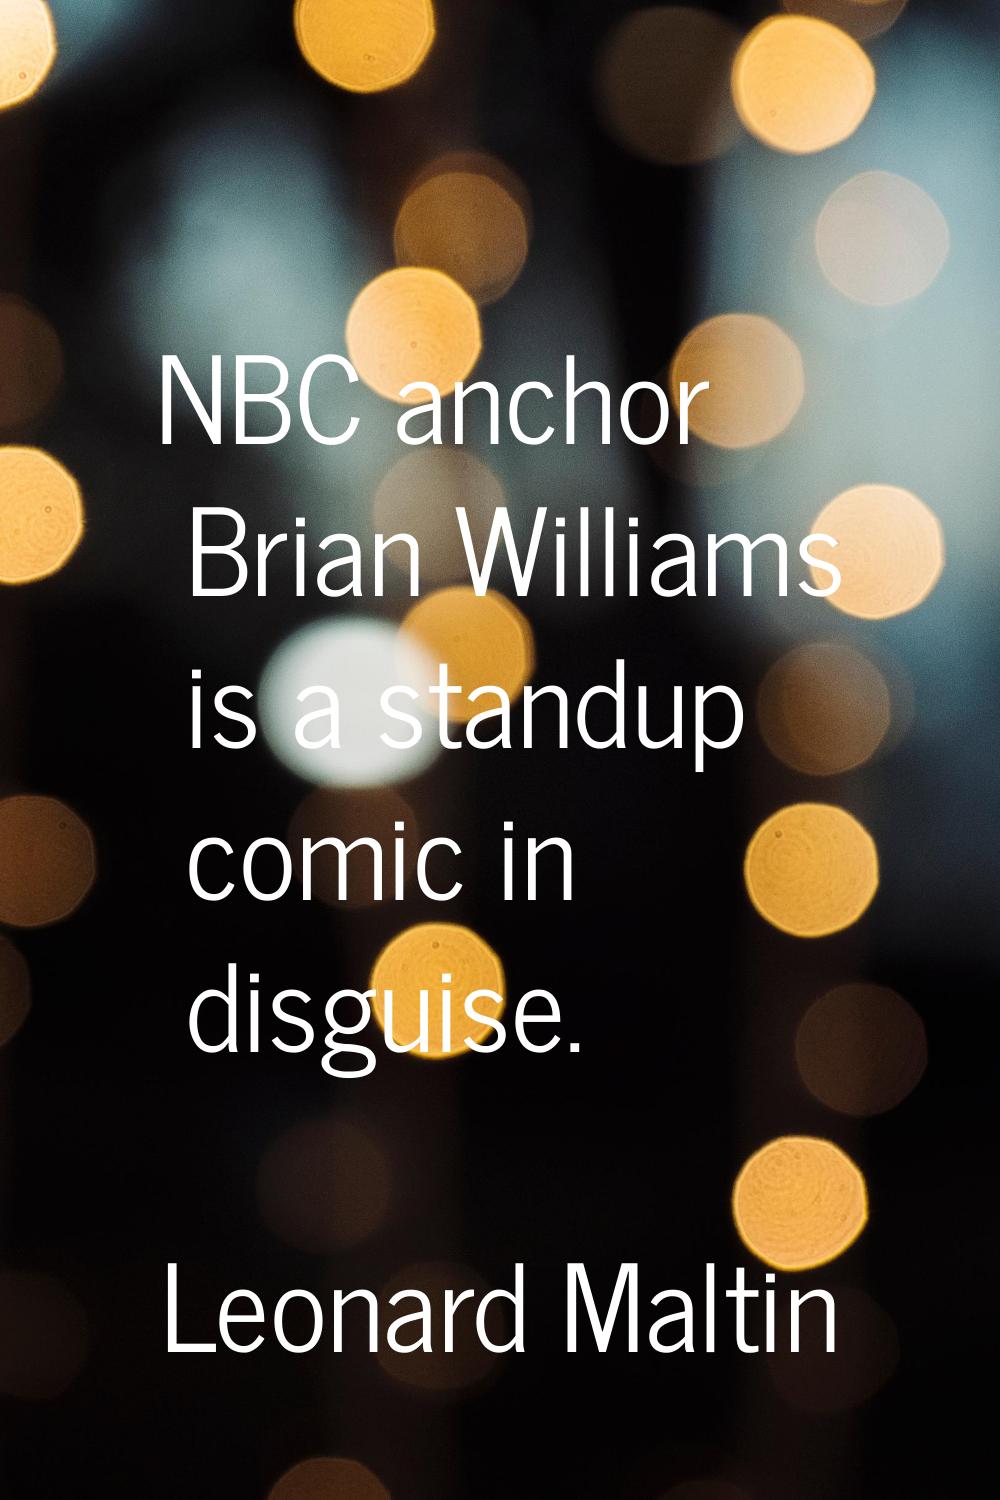 NBC anchor Brian Williams is a standup comic in disguise.